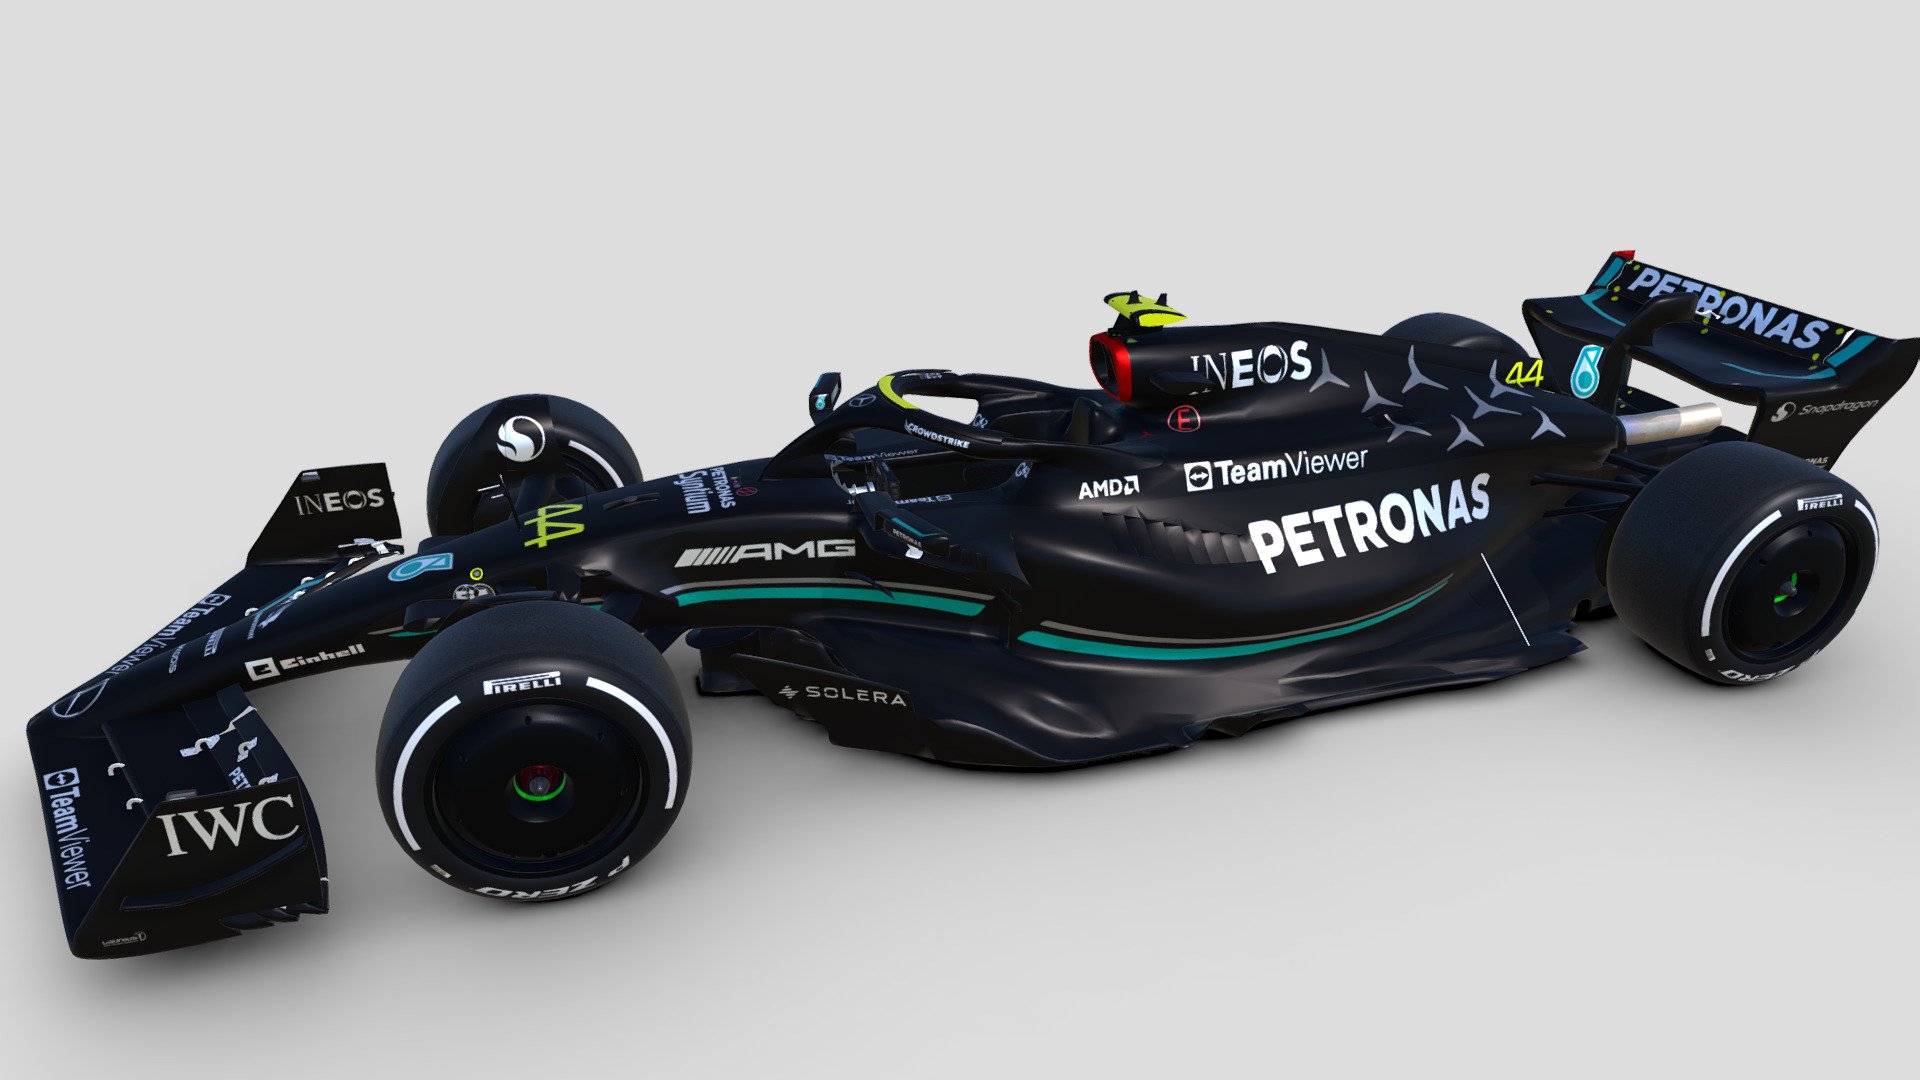 F1 2023 Mercedes W14 . Low Poly 3D model for Grand Prix 4.
Shape version: Early Season
Livery Miami GP - F1 2023 Mercedes W14 - 3D model by Excalibur 3d model